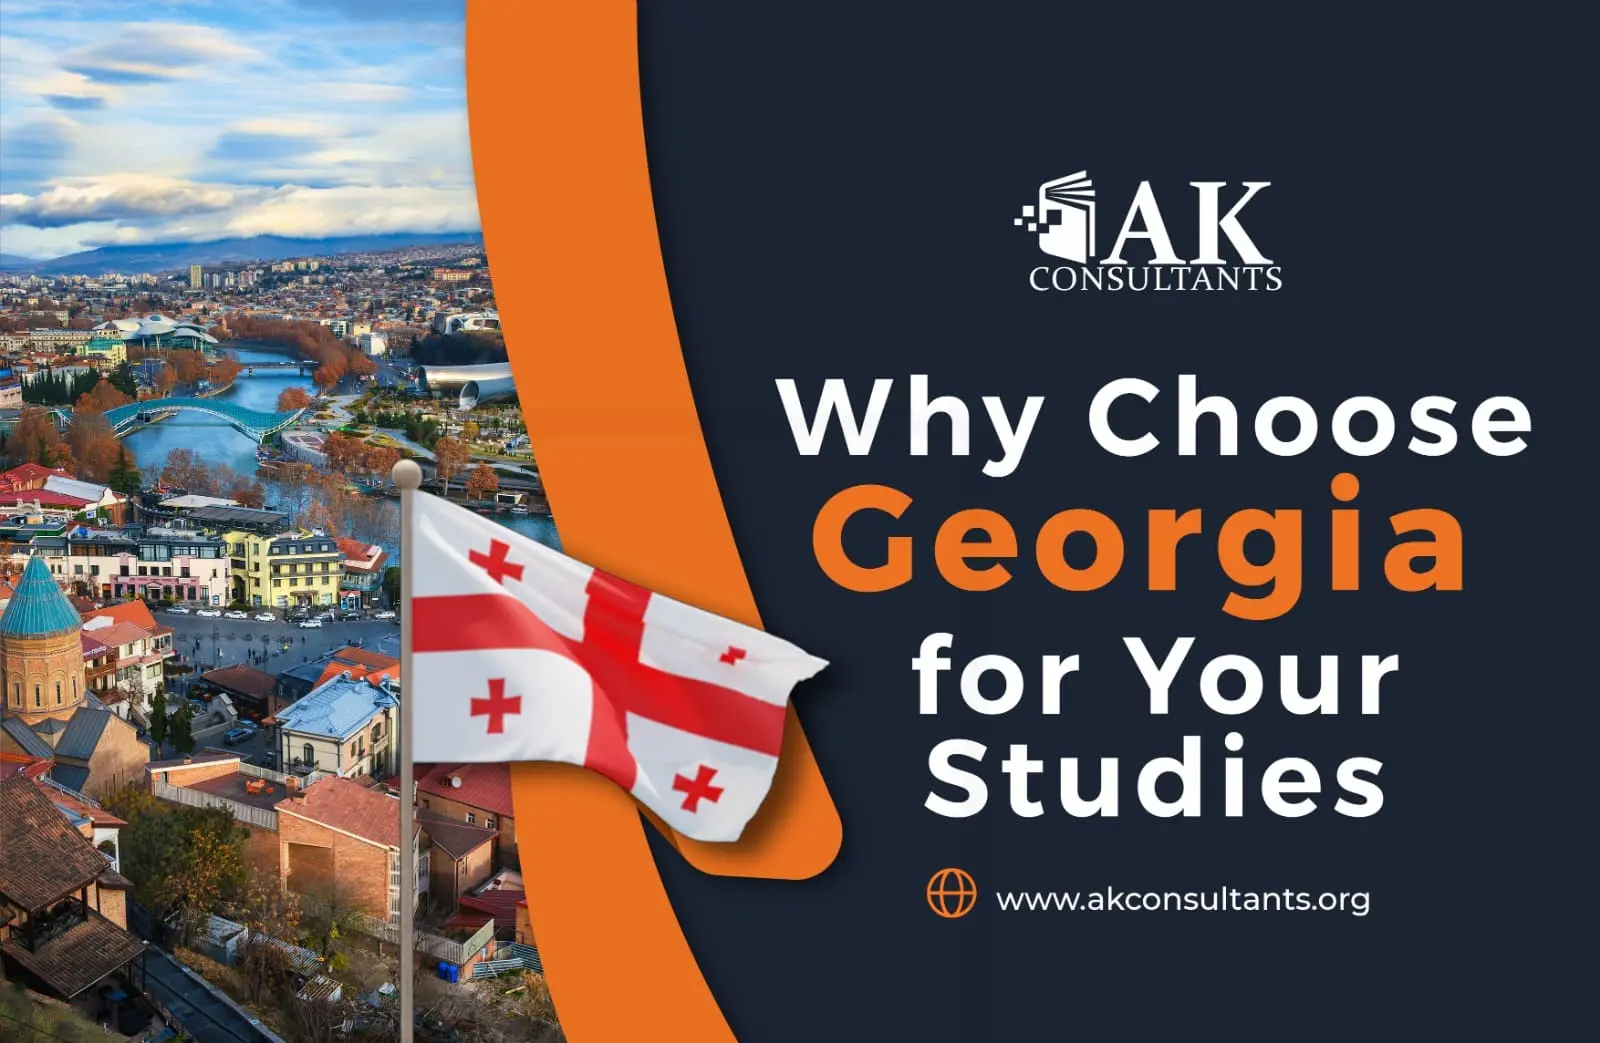 Why Choose Georgia for Your Studies?